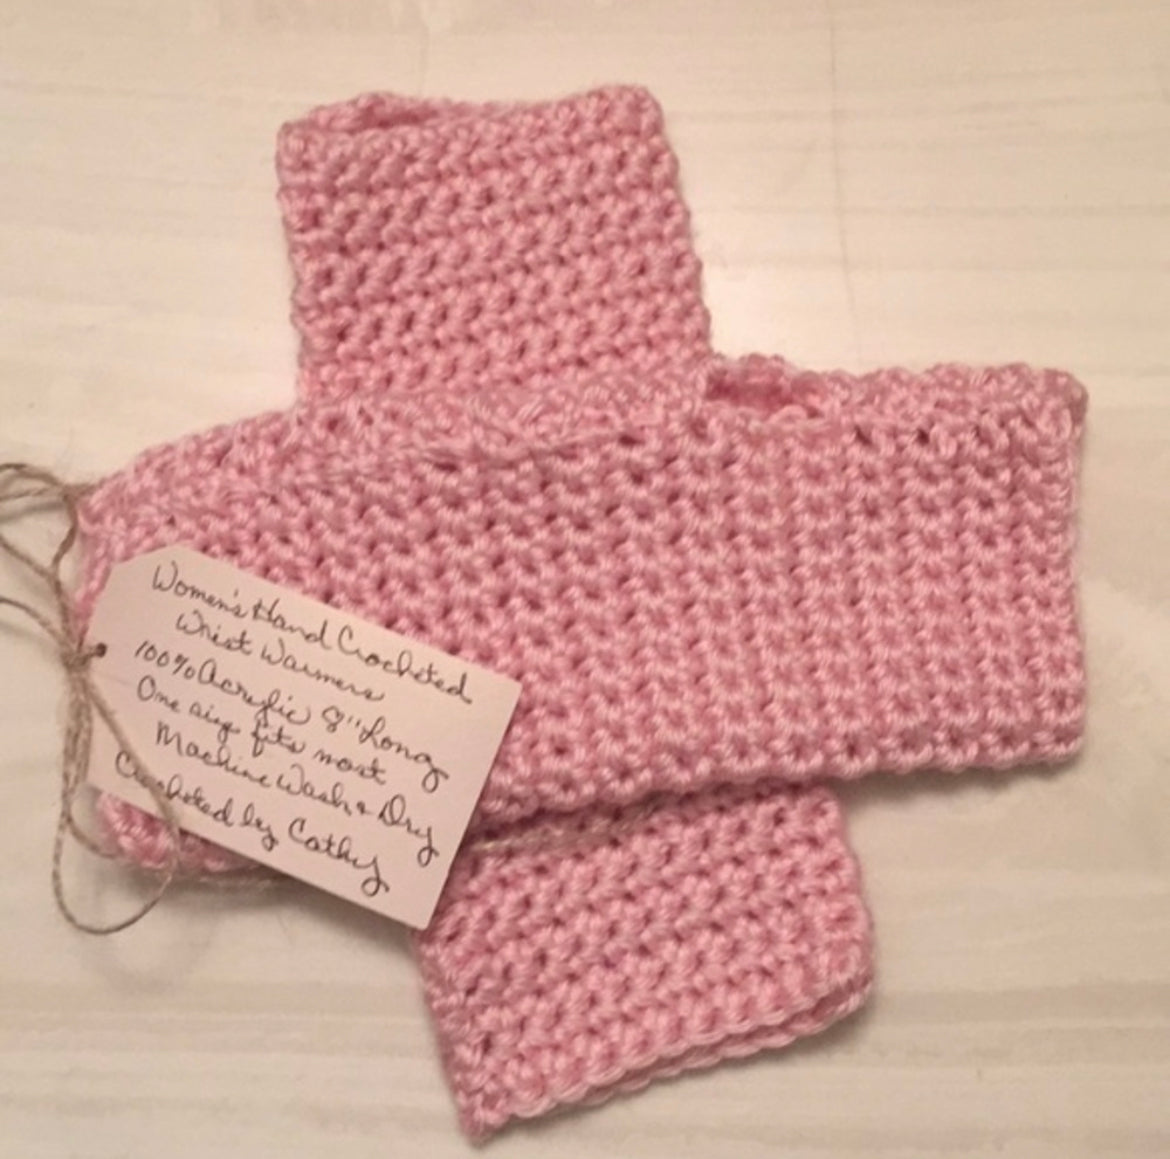 Extra Soft Pastel Baby Pink Writing Tech Fingerless Gloves Crochet Knit Gaming Texting Wrist Warmers